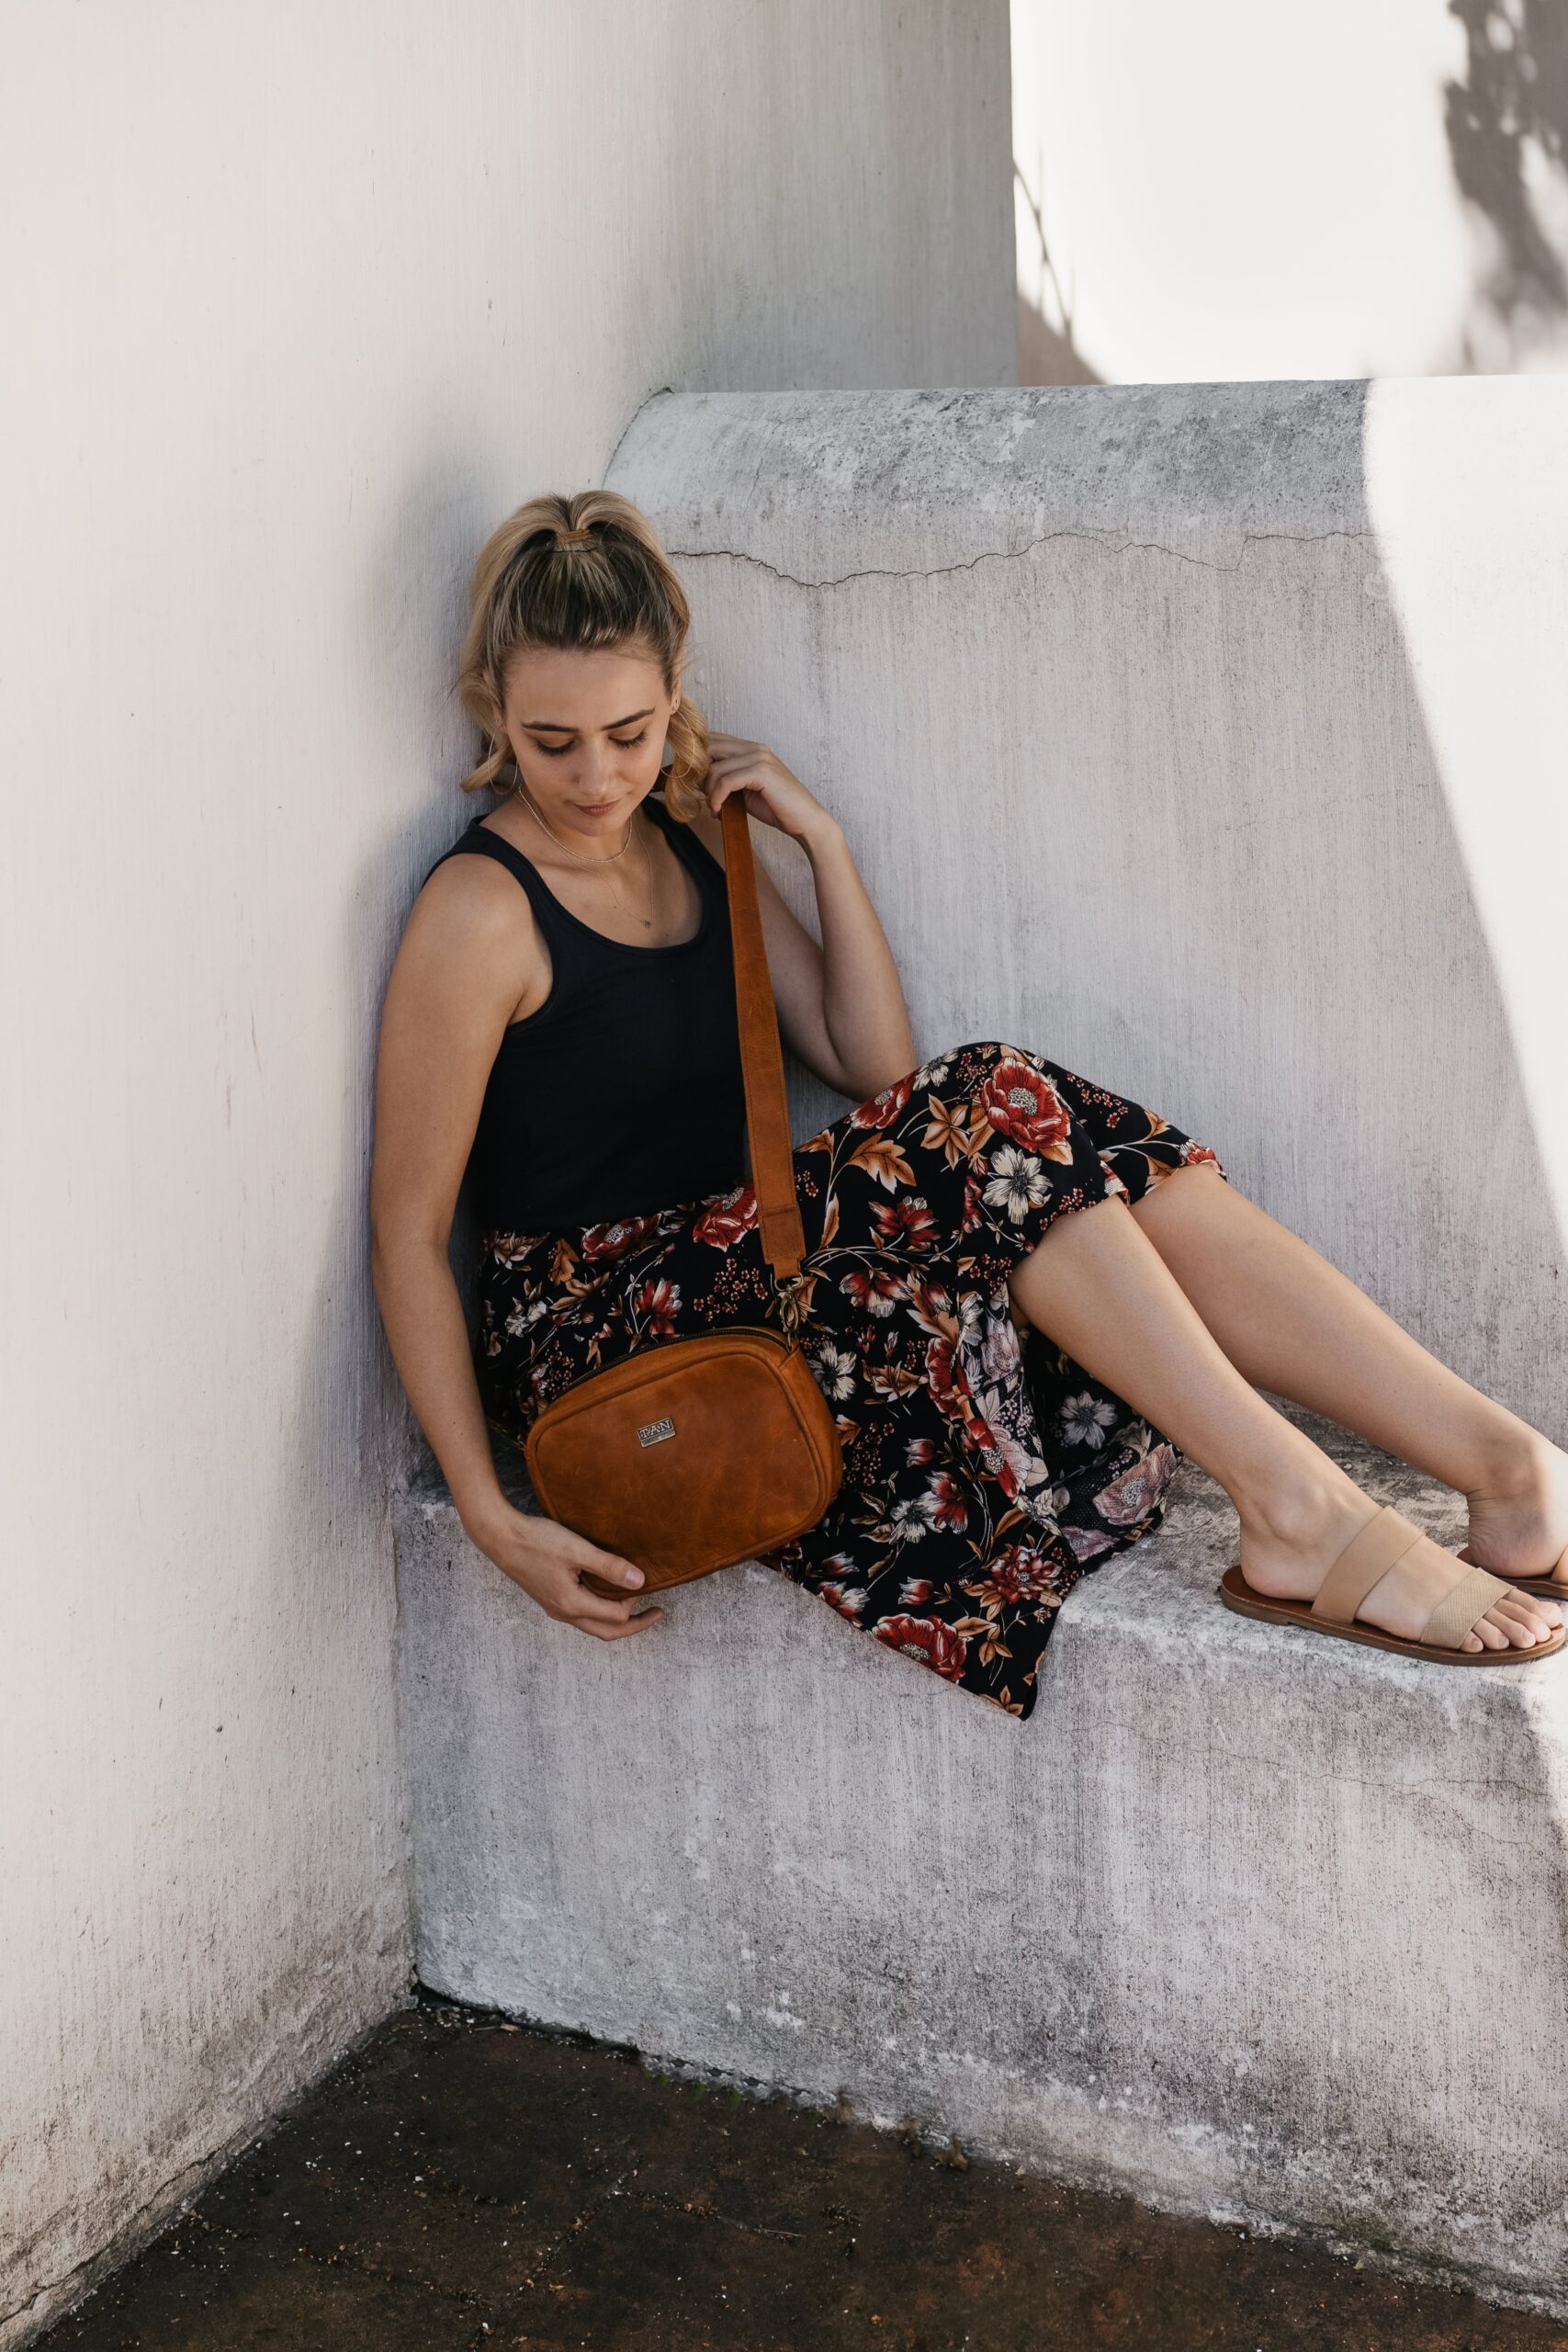 The Lily Sling Bag — Tan Leather Goods